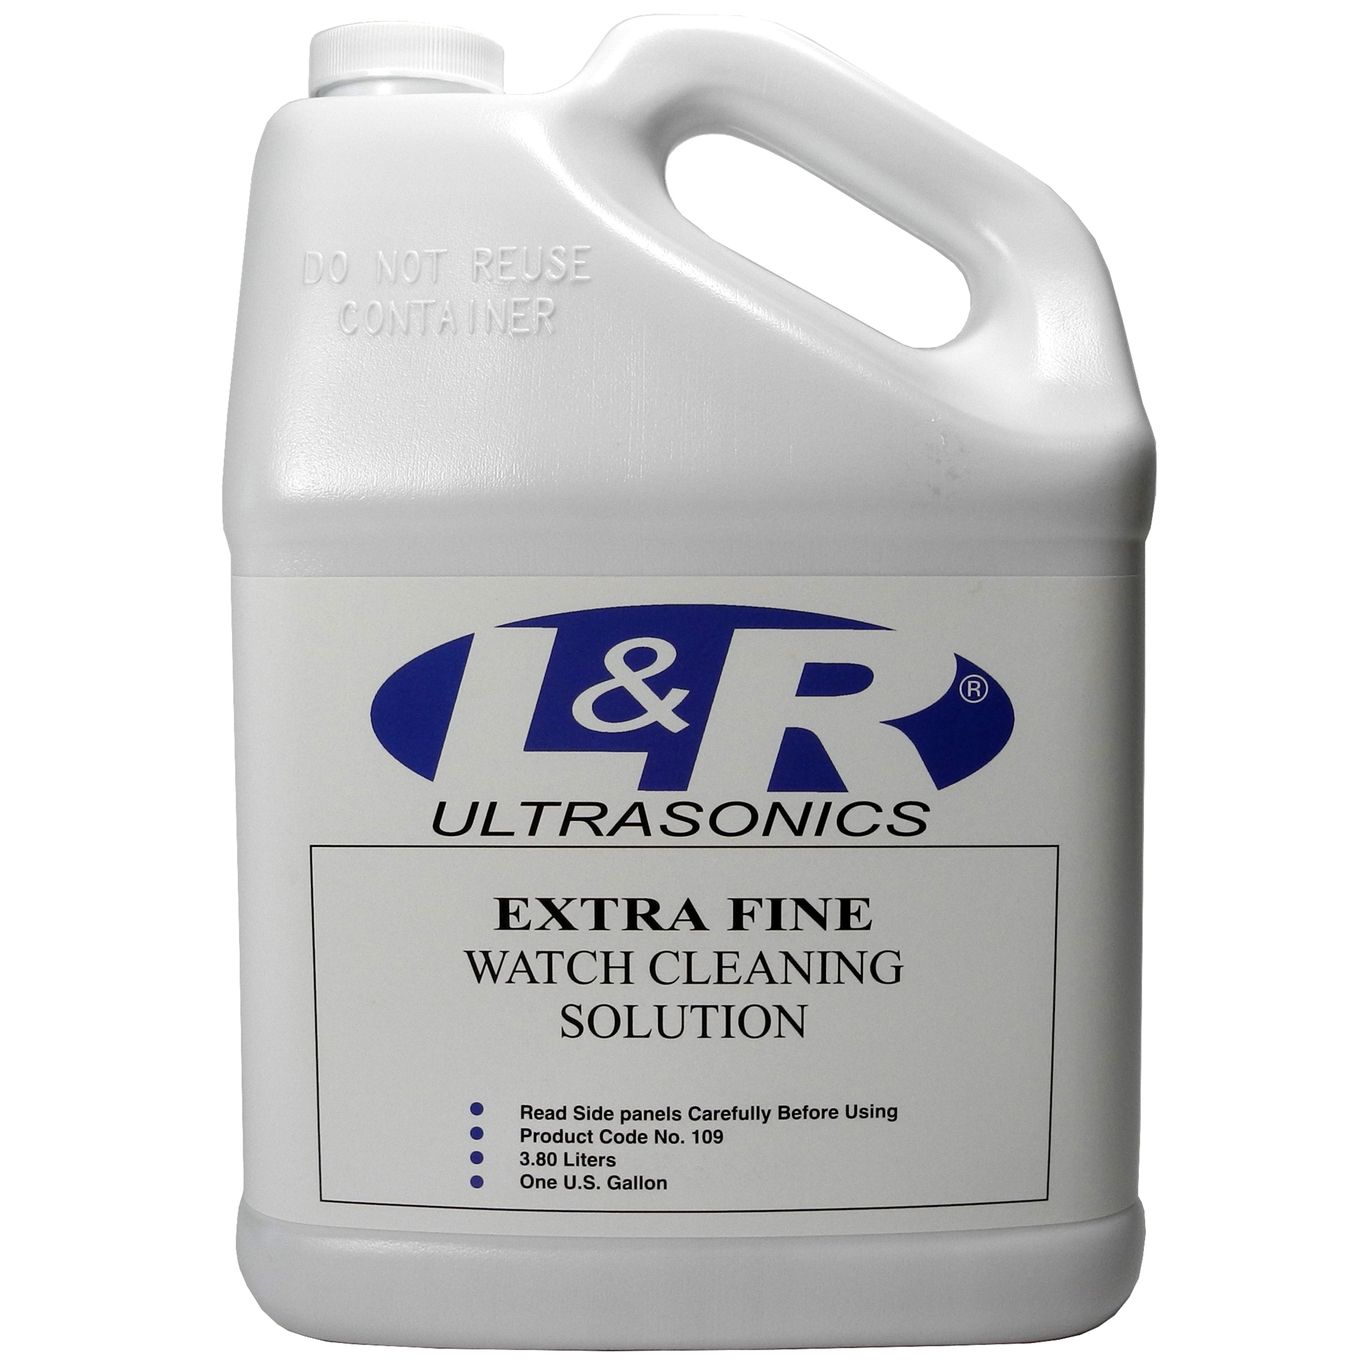 Clock Oil - Cleaning Solution - Clock oil and cleaning solution